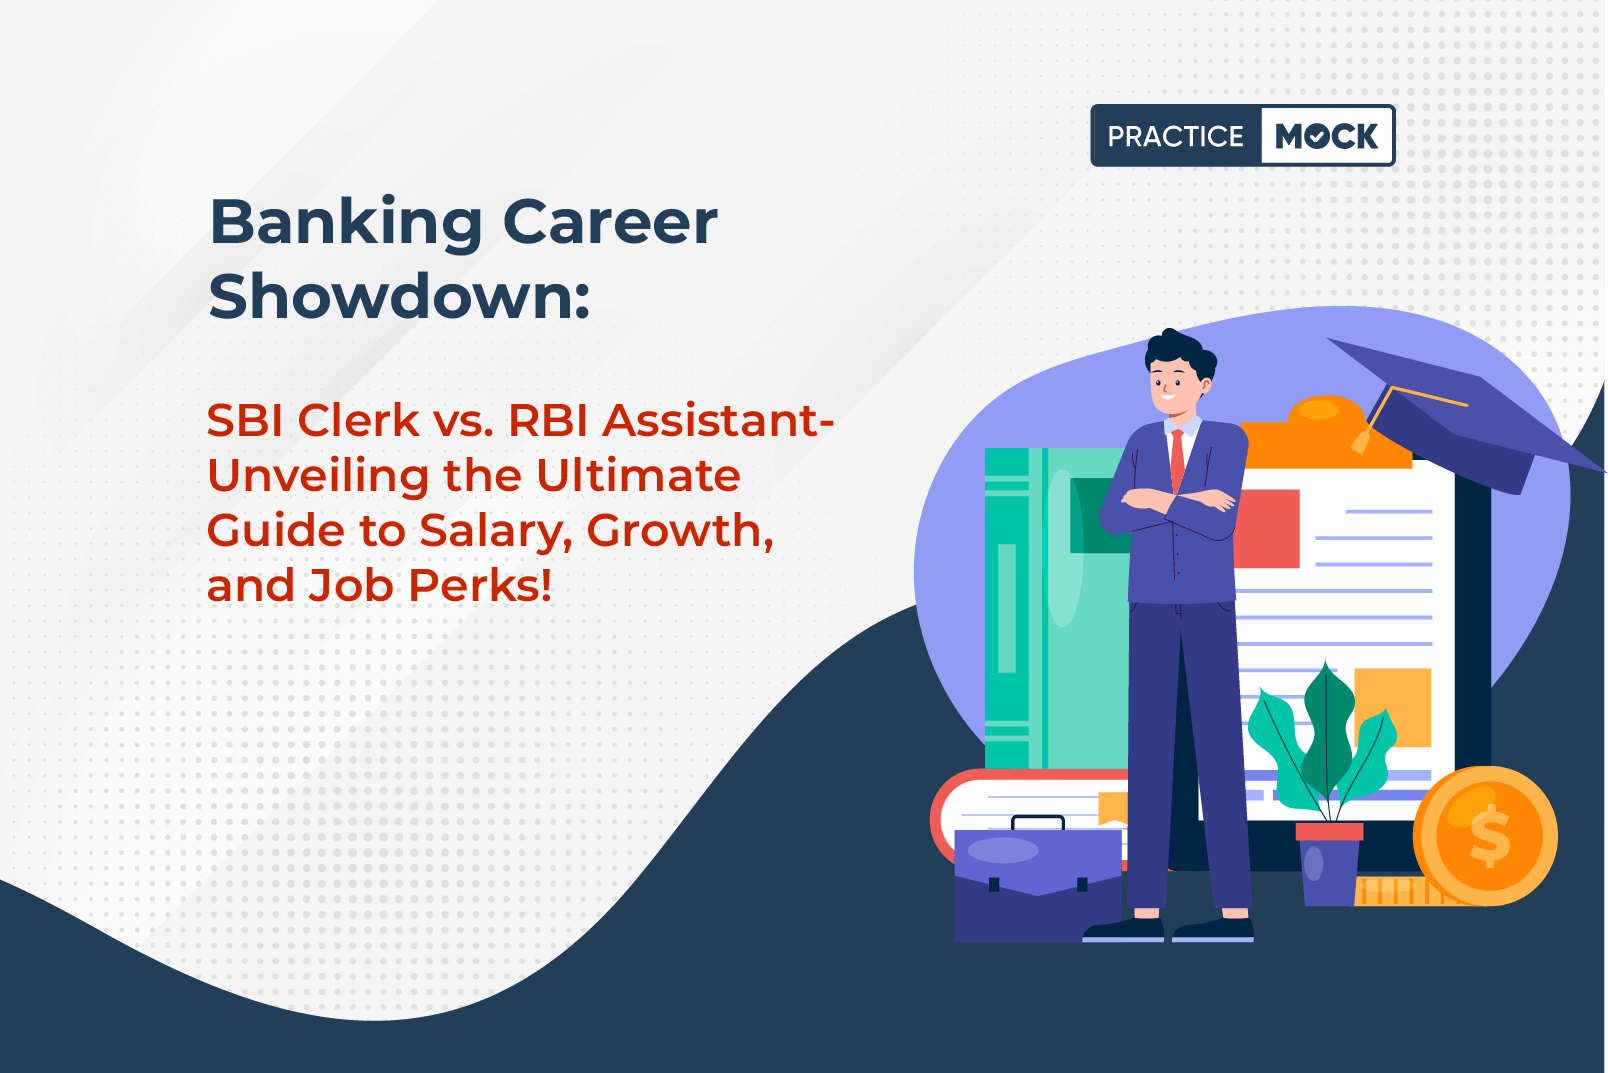 Banking Career Showdown SBI Clerk vs. RBI Assistant- Unveiling the Ultimate Guide to Salary, Growth, and Job Perks! (1)